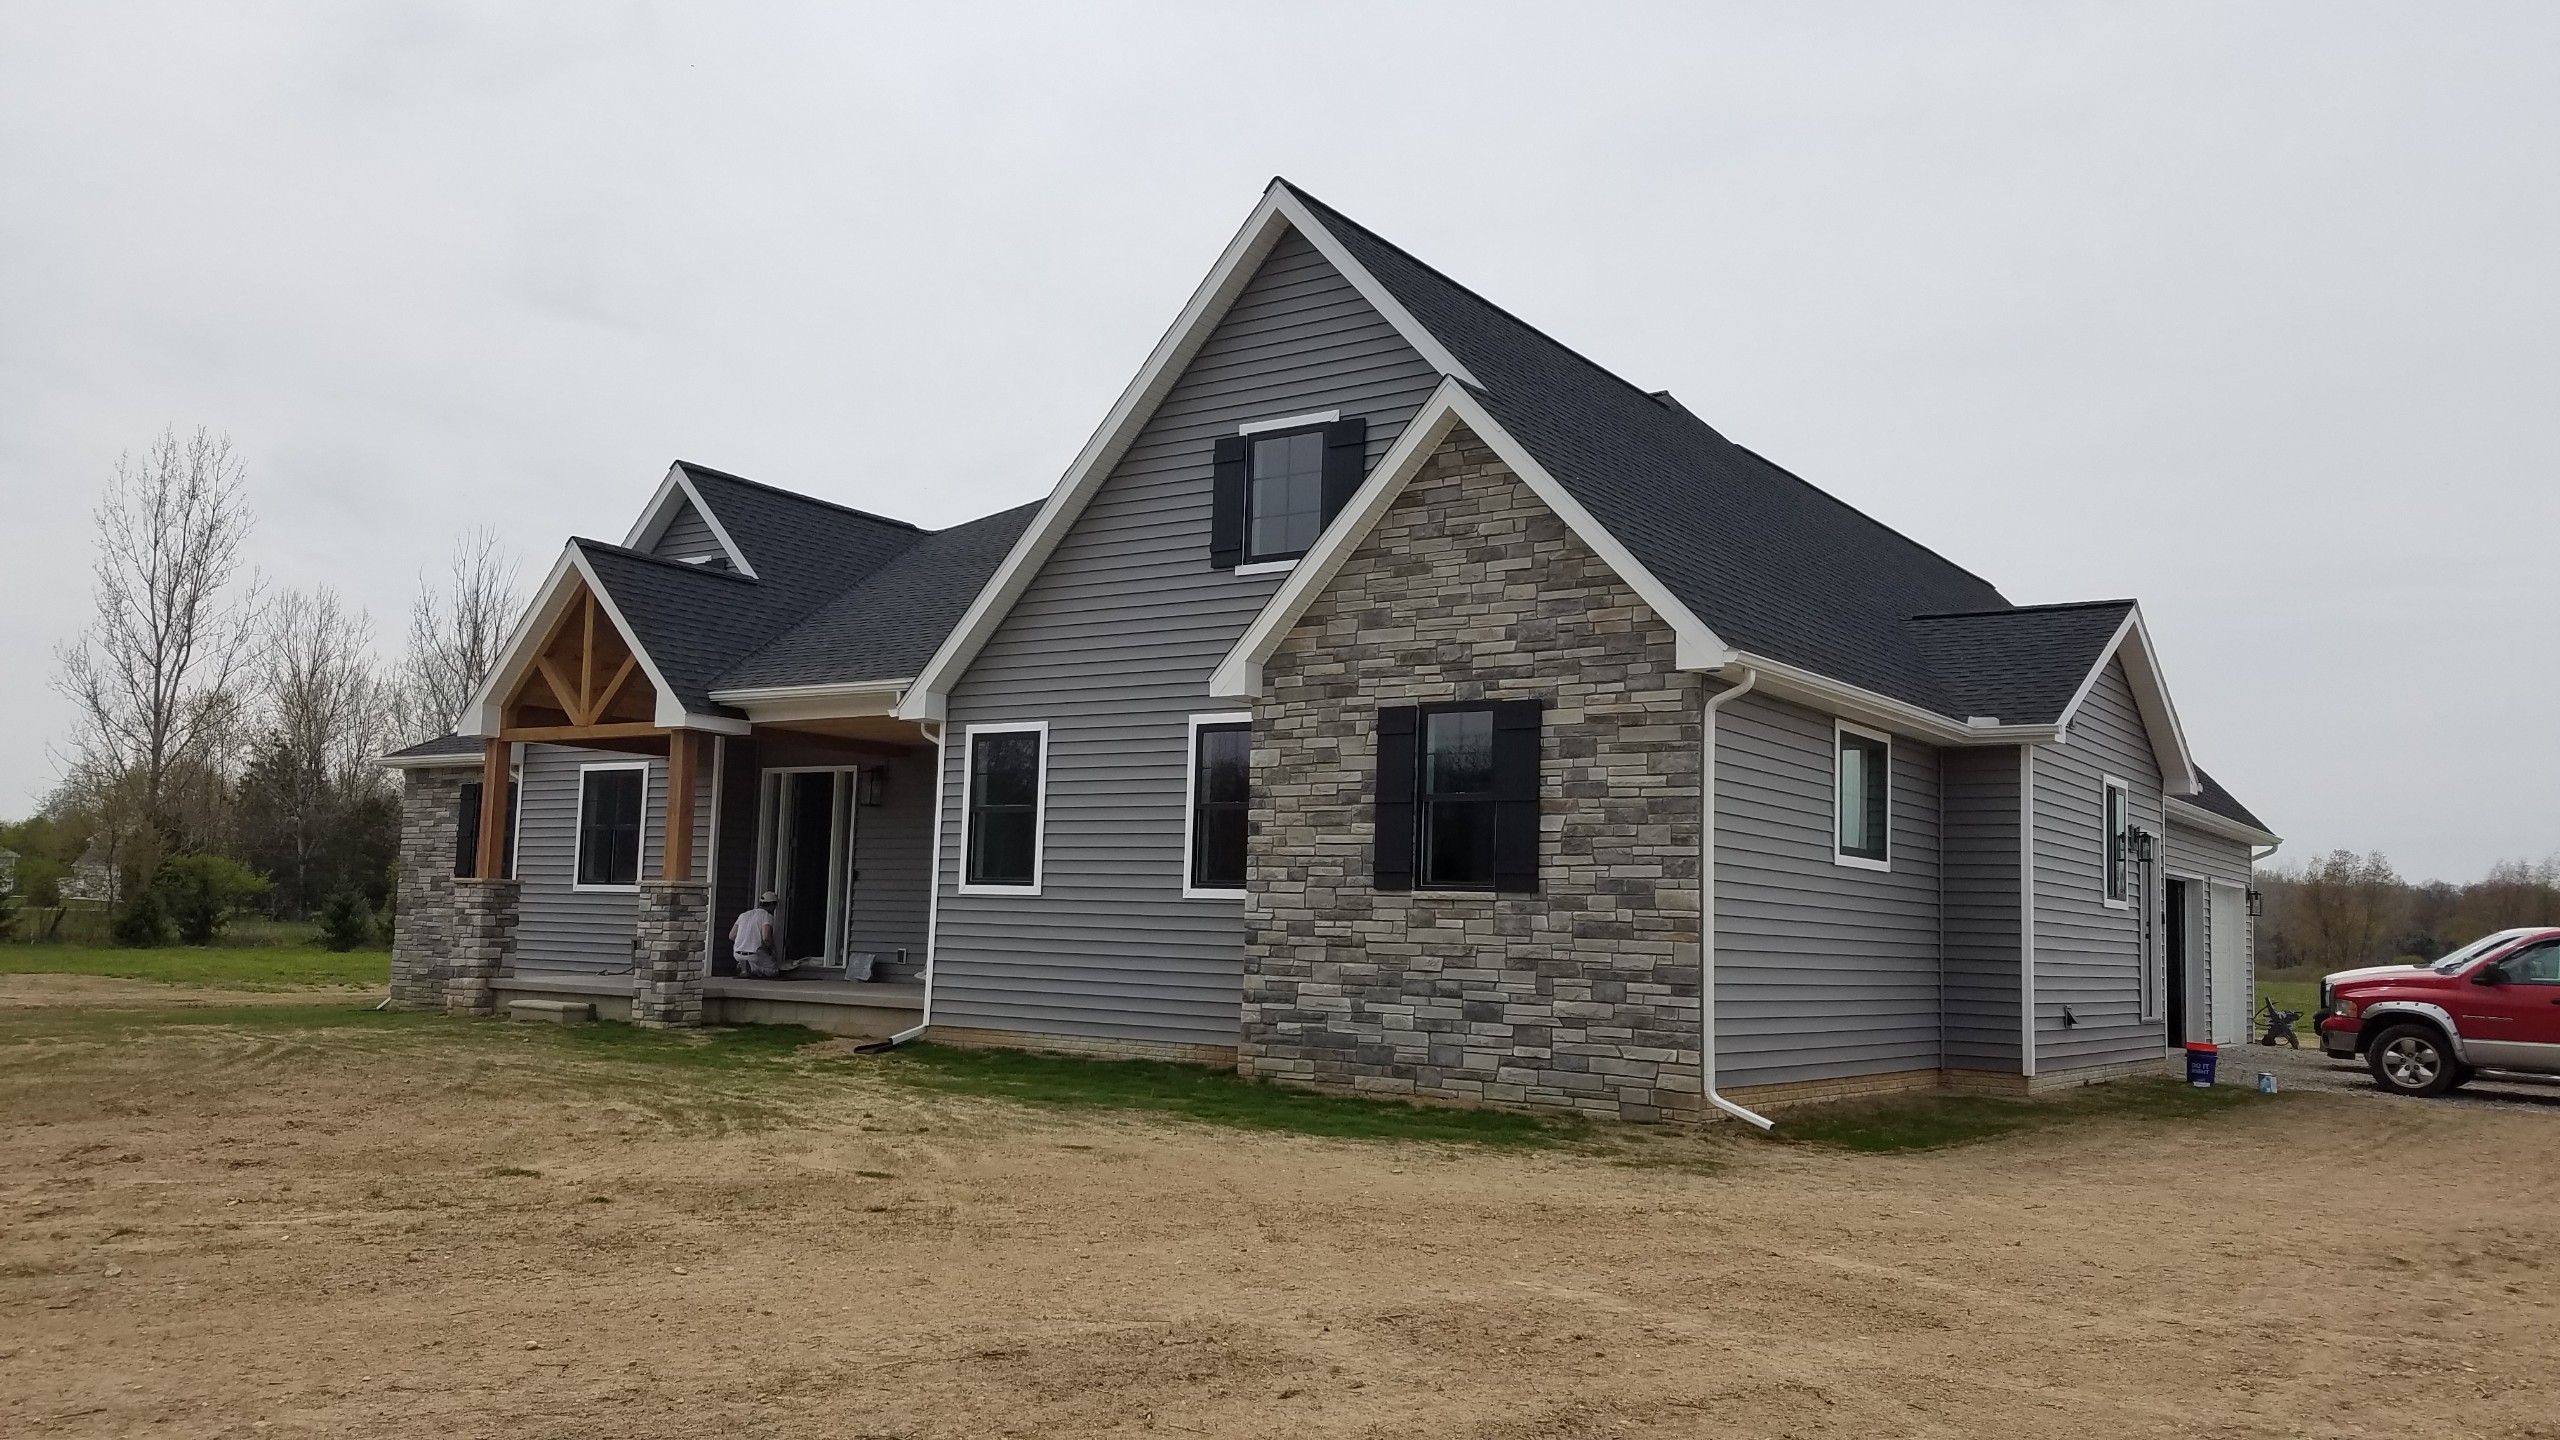 New home - full exterior work - Roof, Siding, Stone